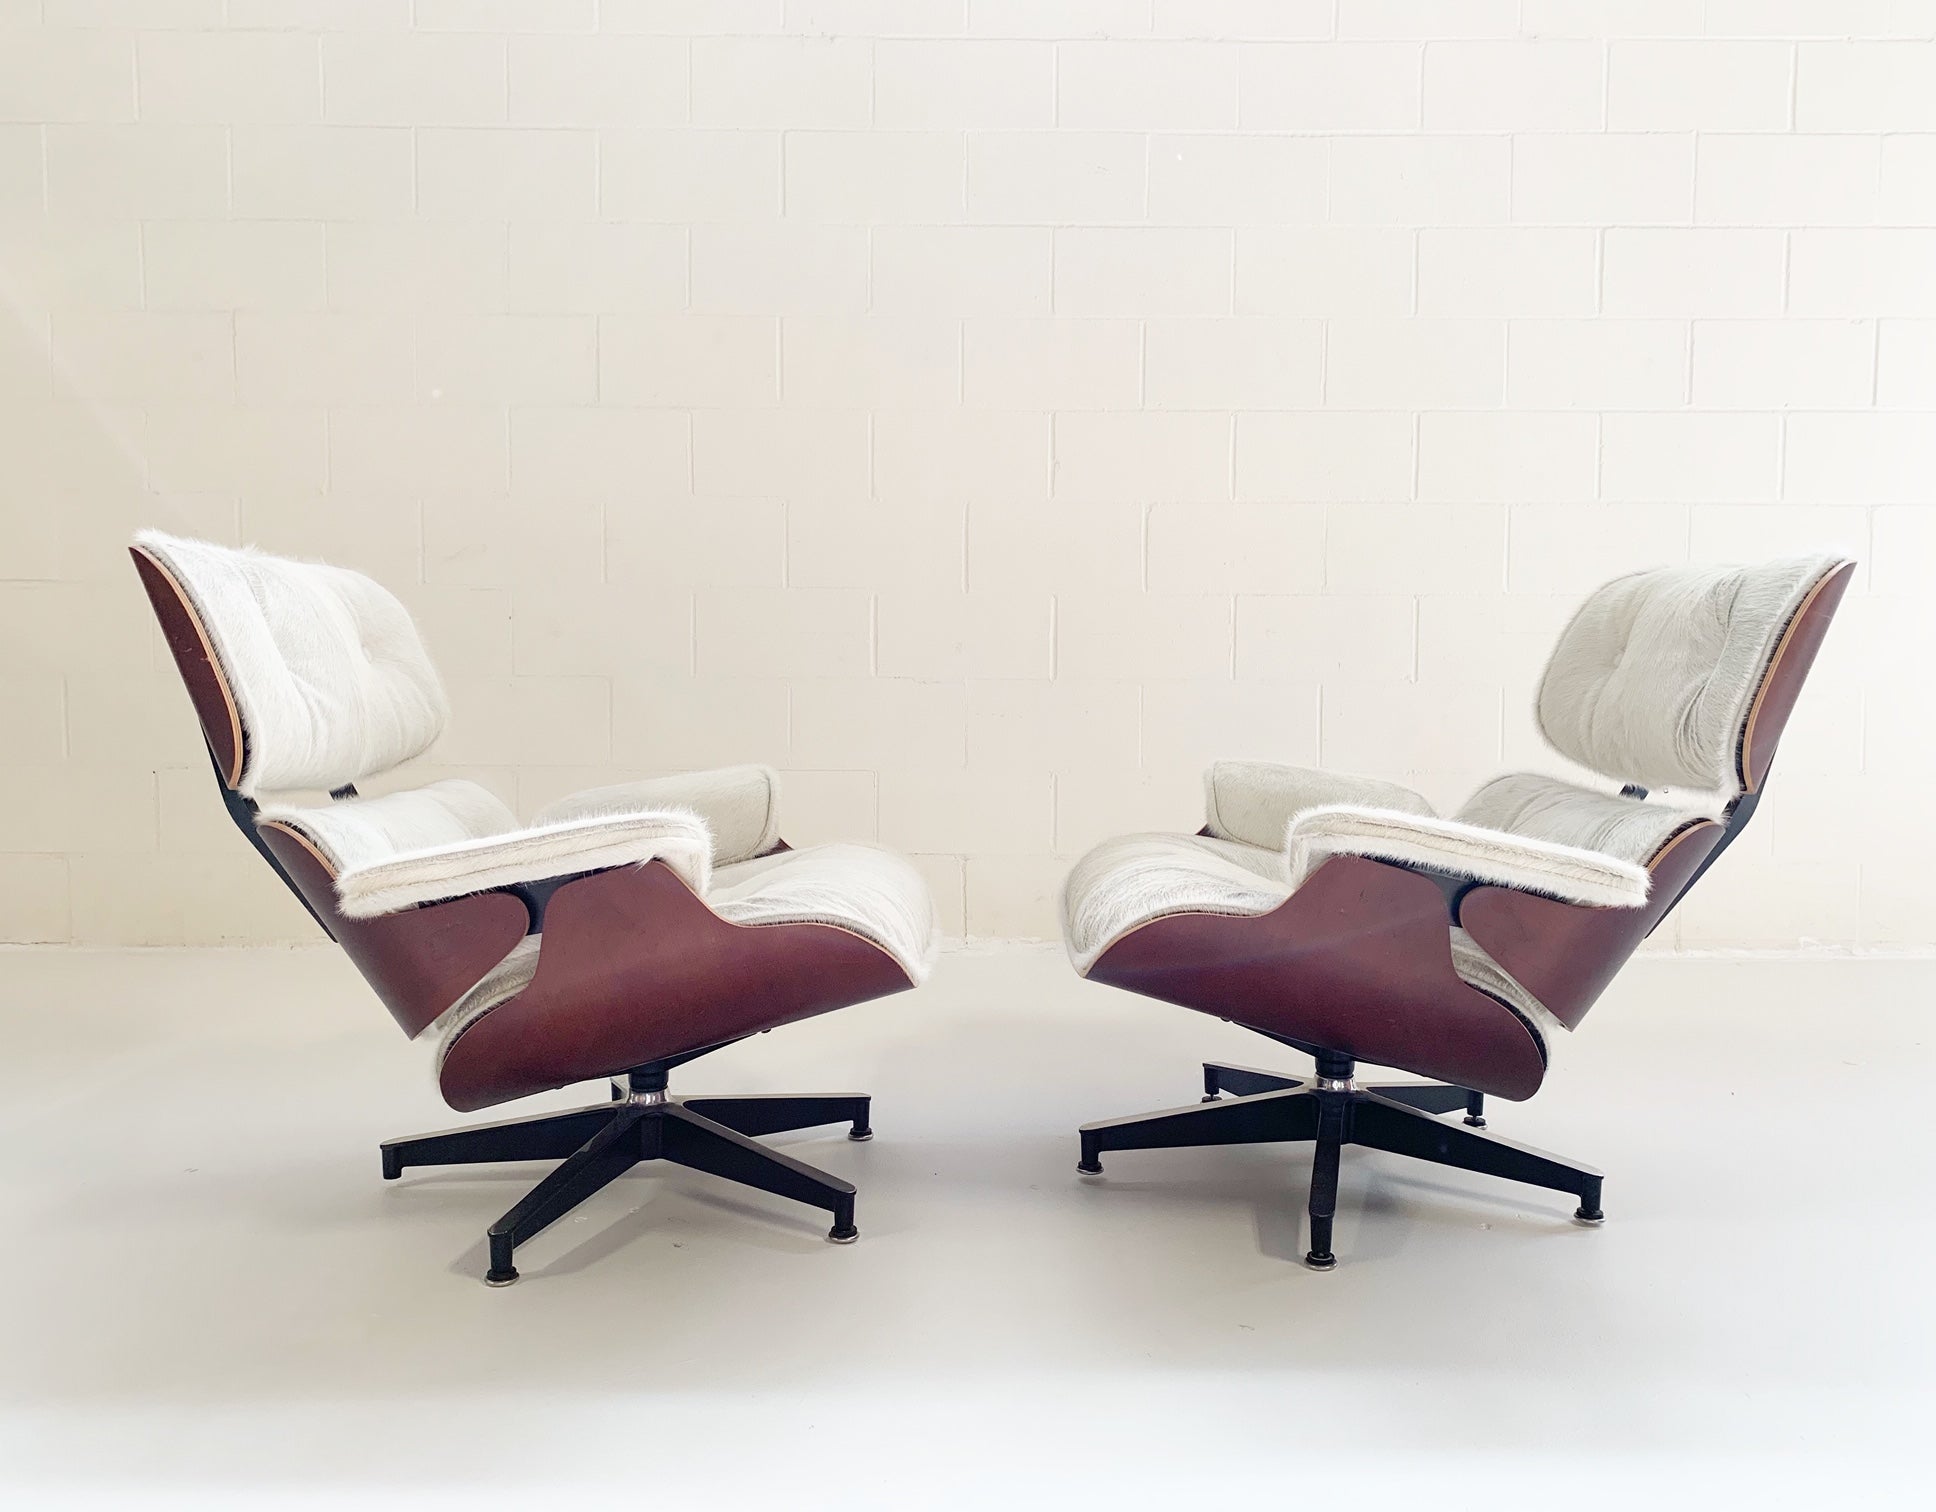 670 Lounge Chairs and 671 Ottomans in Brazilian Cowhide - FORSYTH